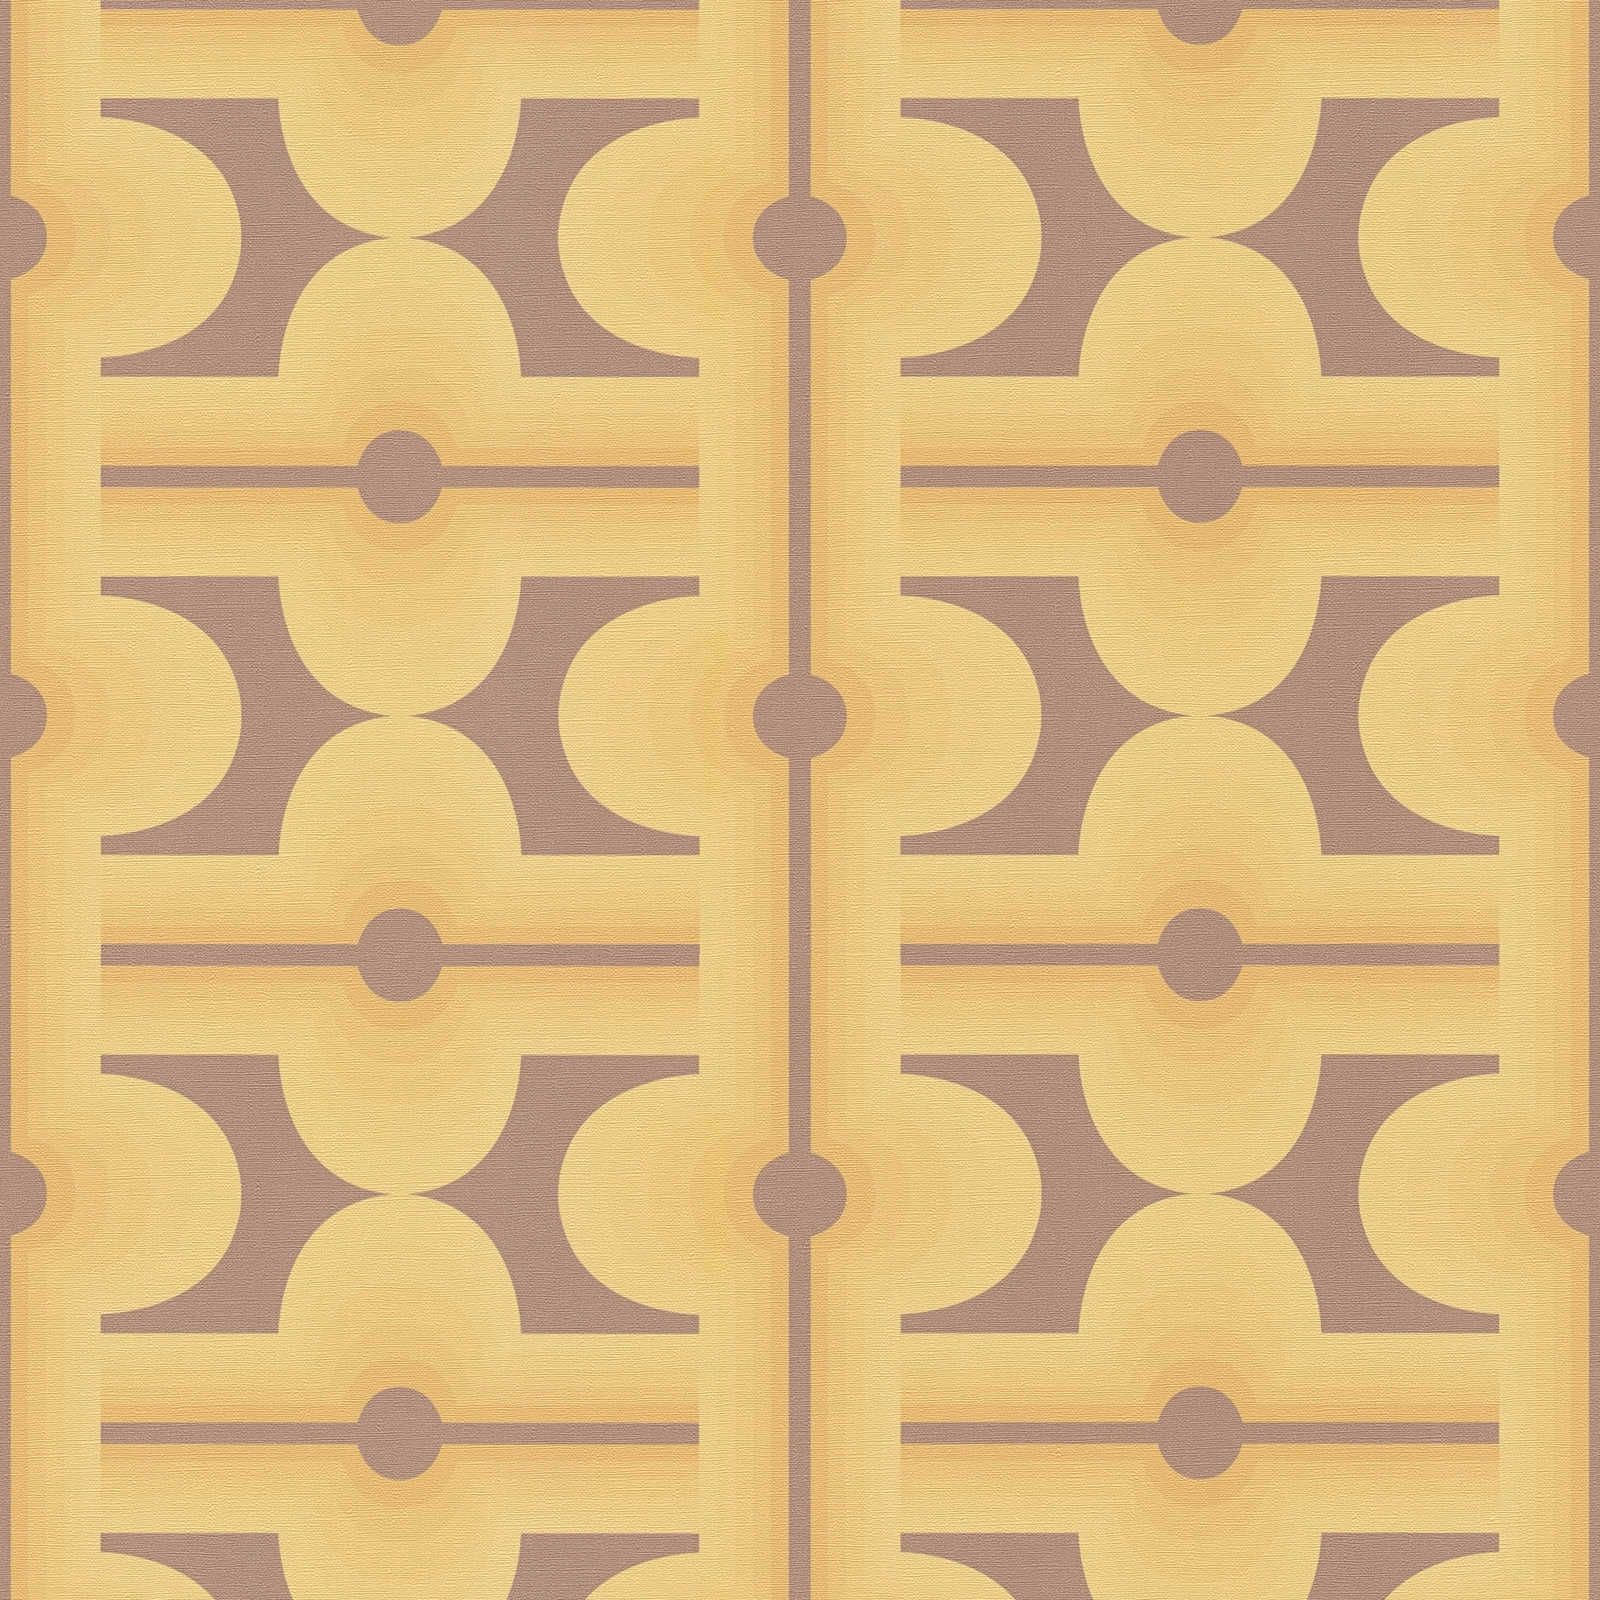 Abstract patterns on 70s non-woven wallpaper in warm colours - brown, yellow, orange
